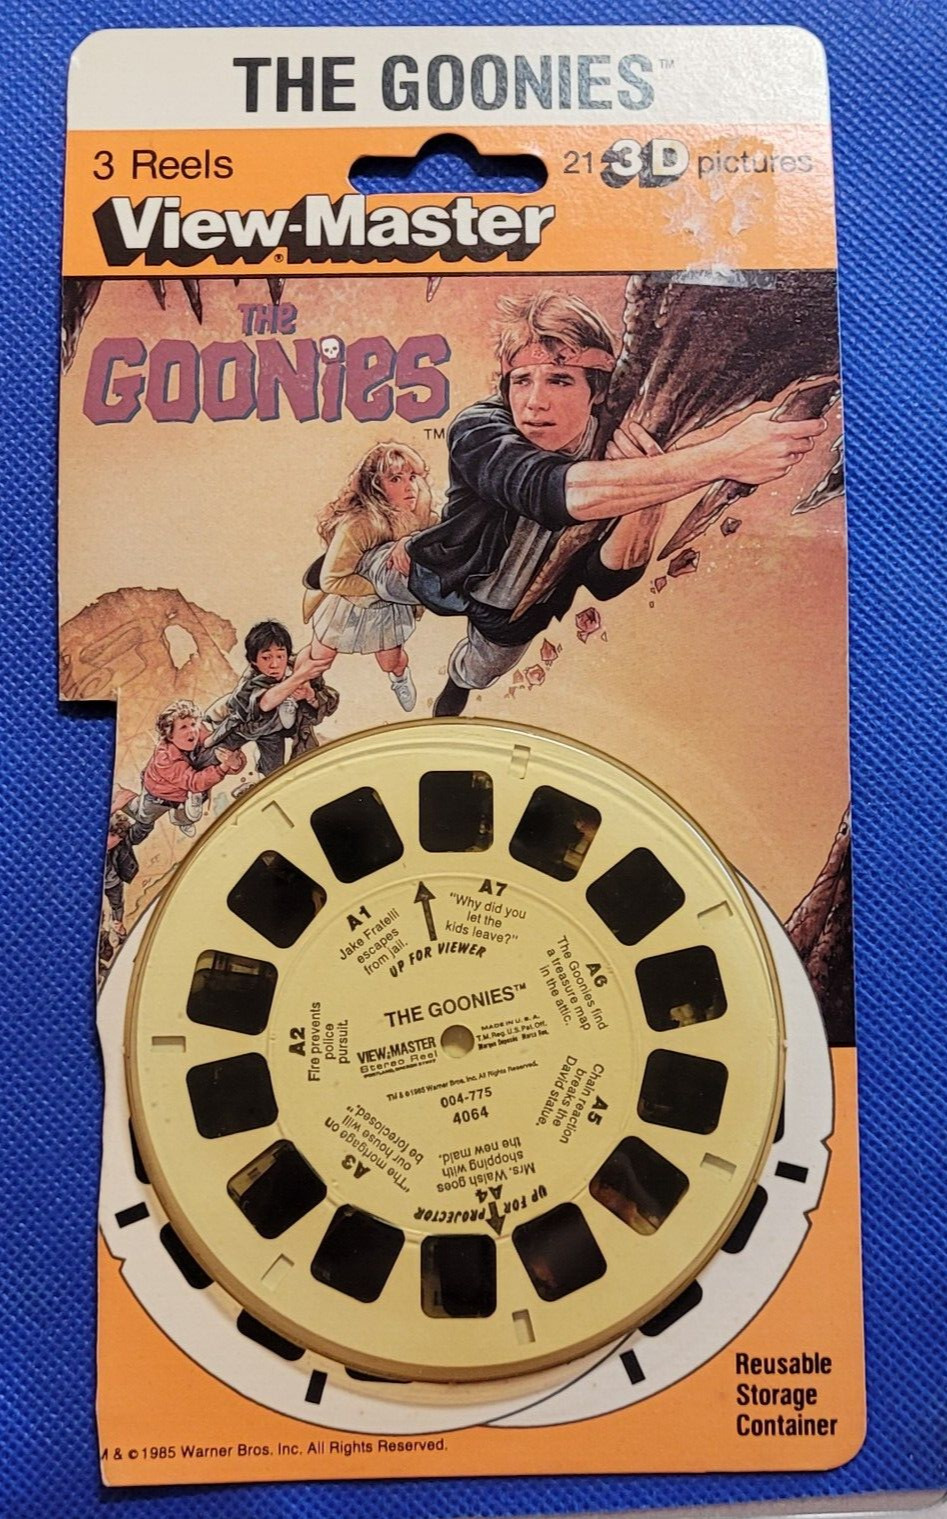 Scarce #4064 The Goonies Movie view-master 3 Reels blister pack opened set